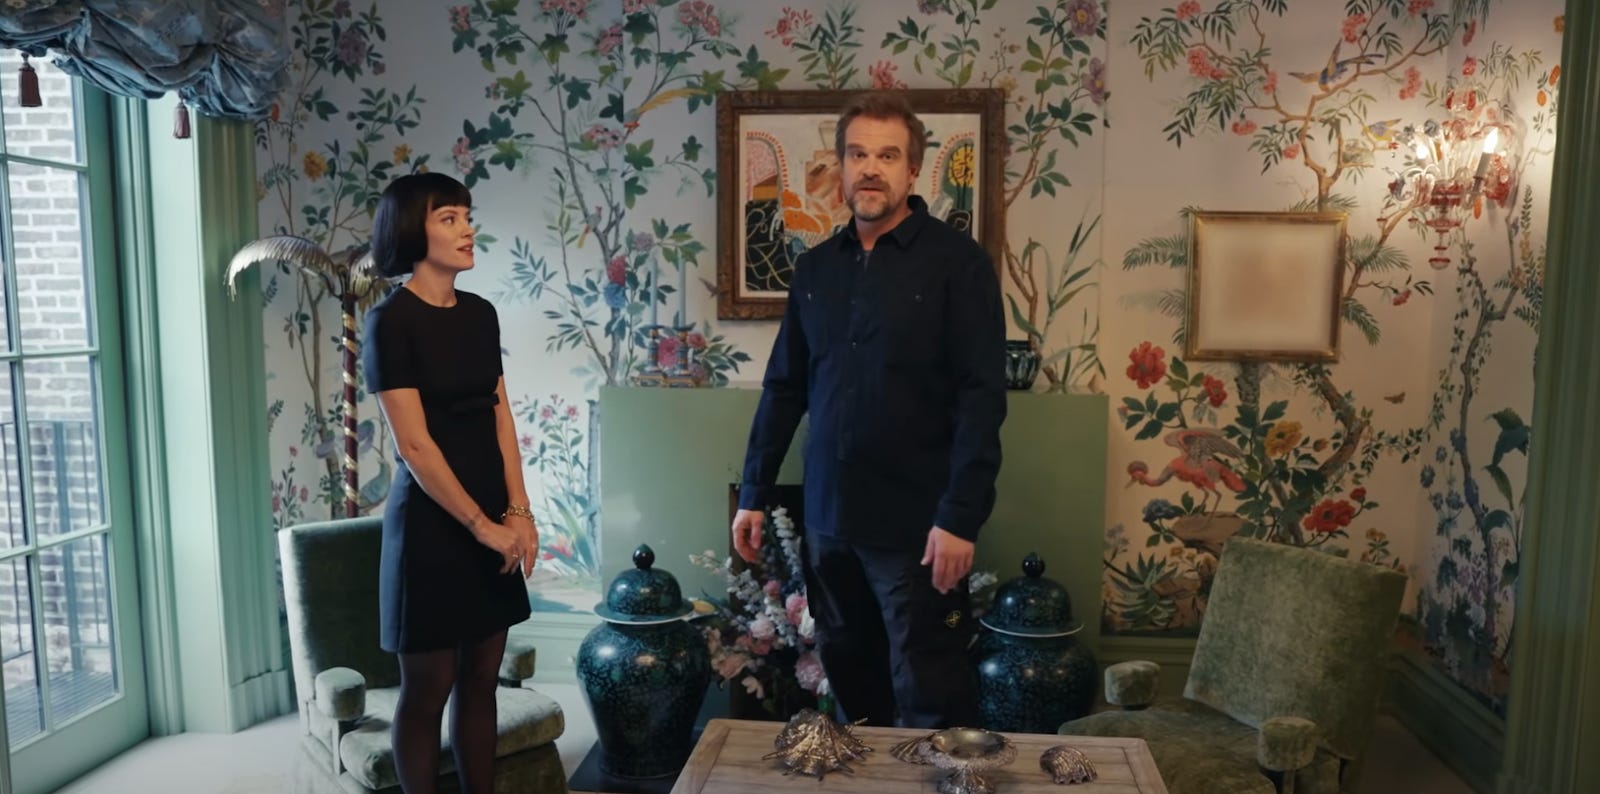 Perhaps The David Harbour-Lily Allen Home Is Worth Wrecking